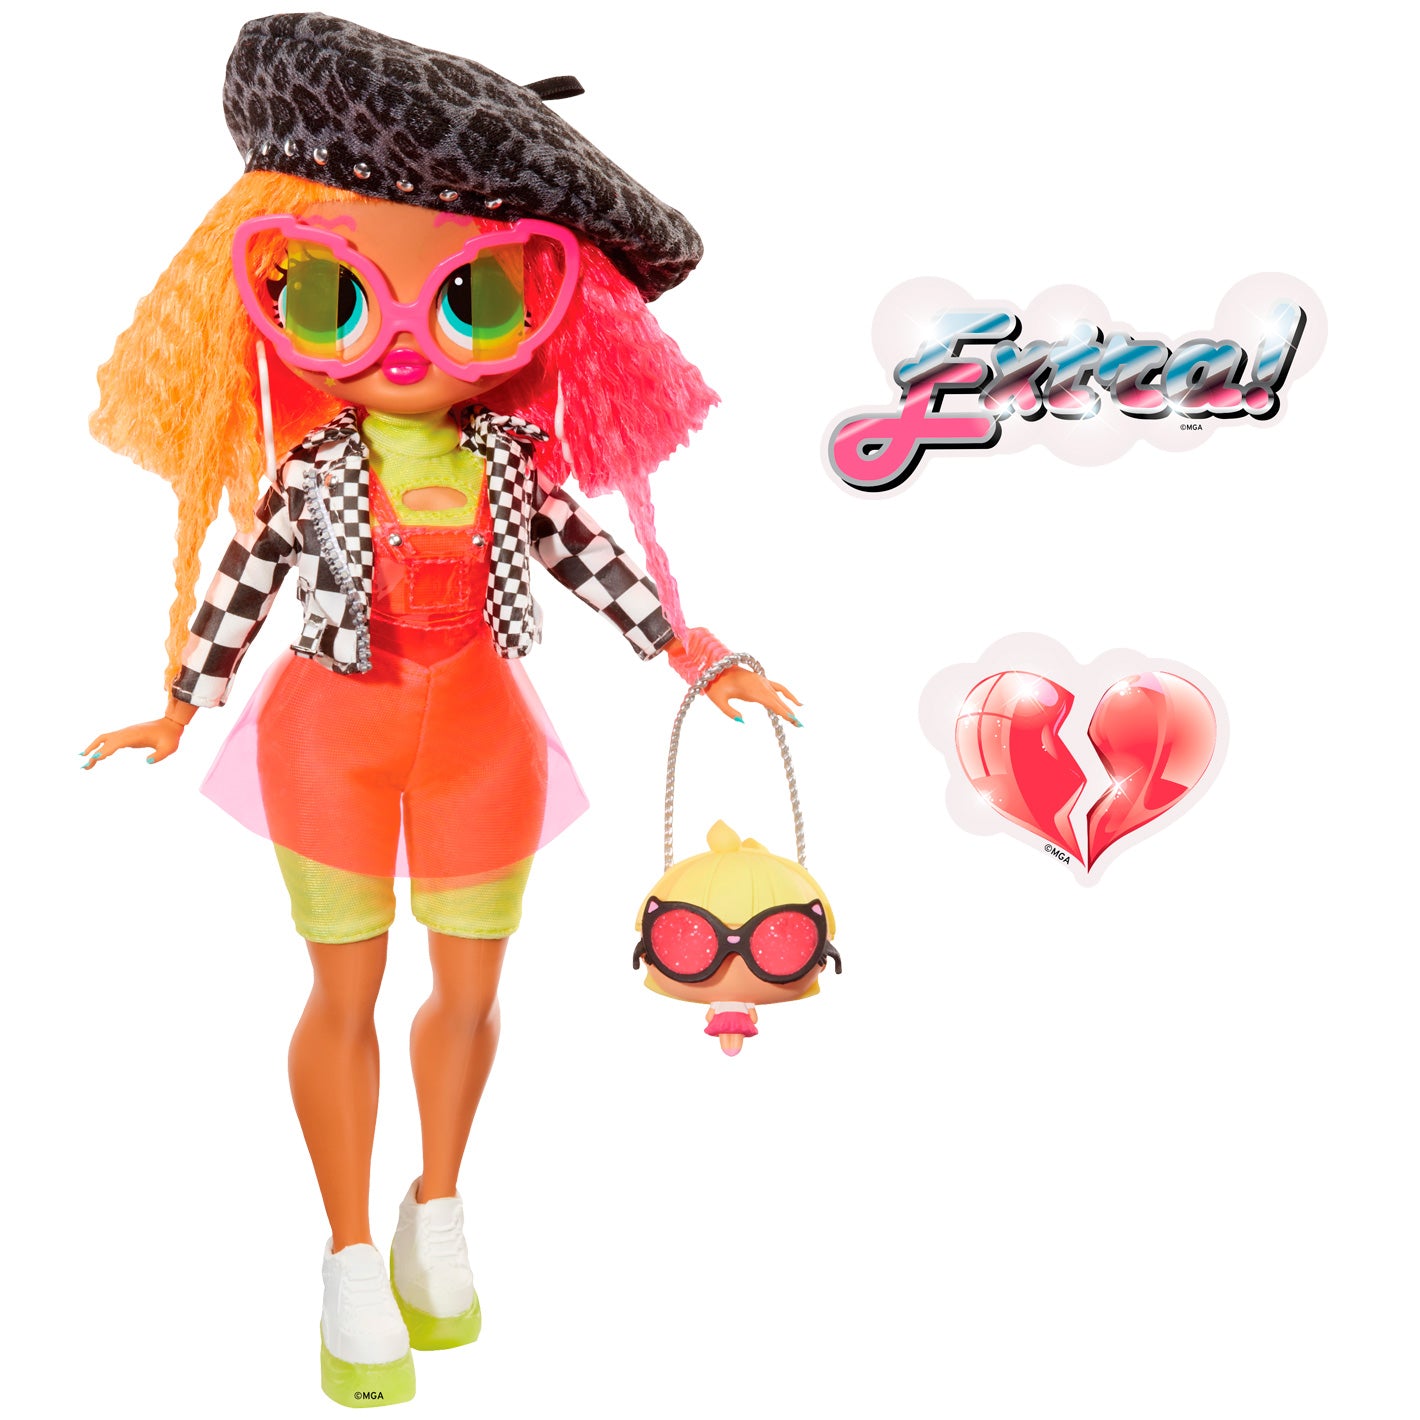 LOL Dolls: NEONLICIOUS - Officially Licensed MGA Removable Wall Adhesi –  Fathead